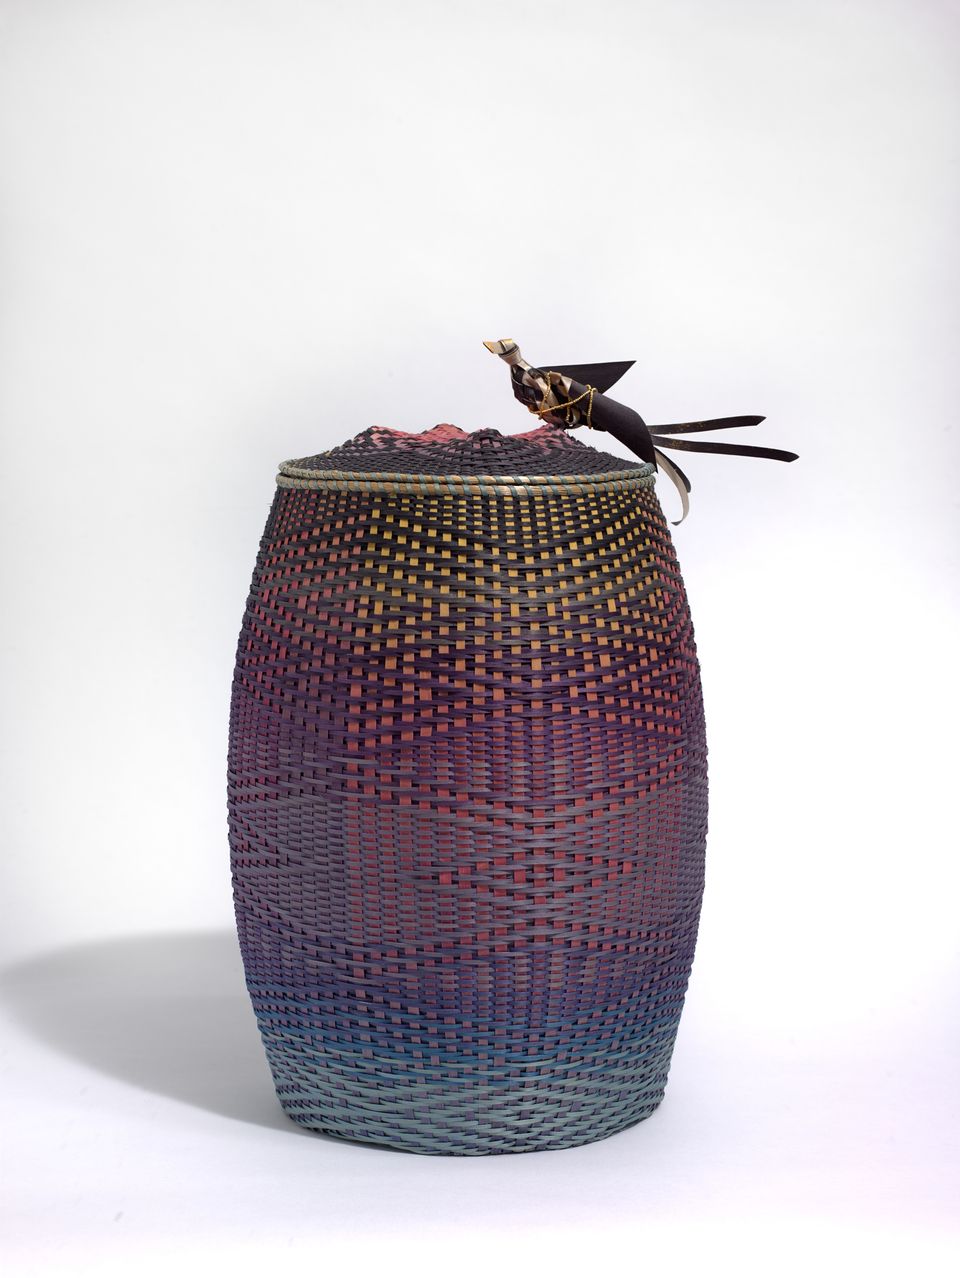 A basket with a bird on the lid. Woven in a purple ombré hue